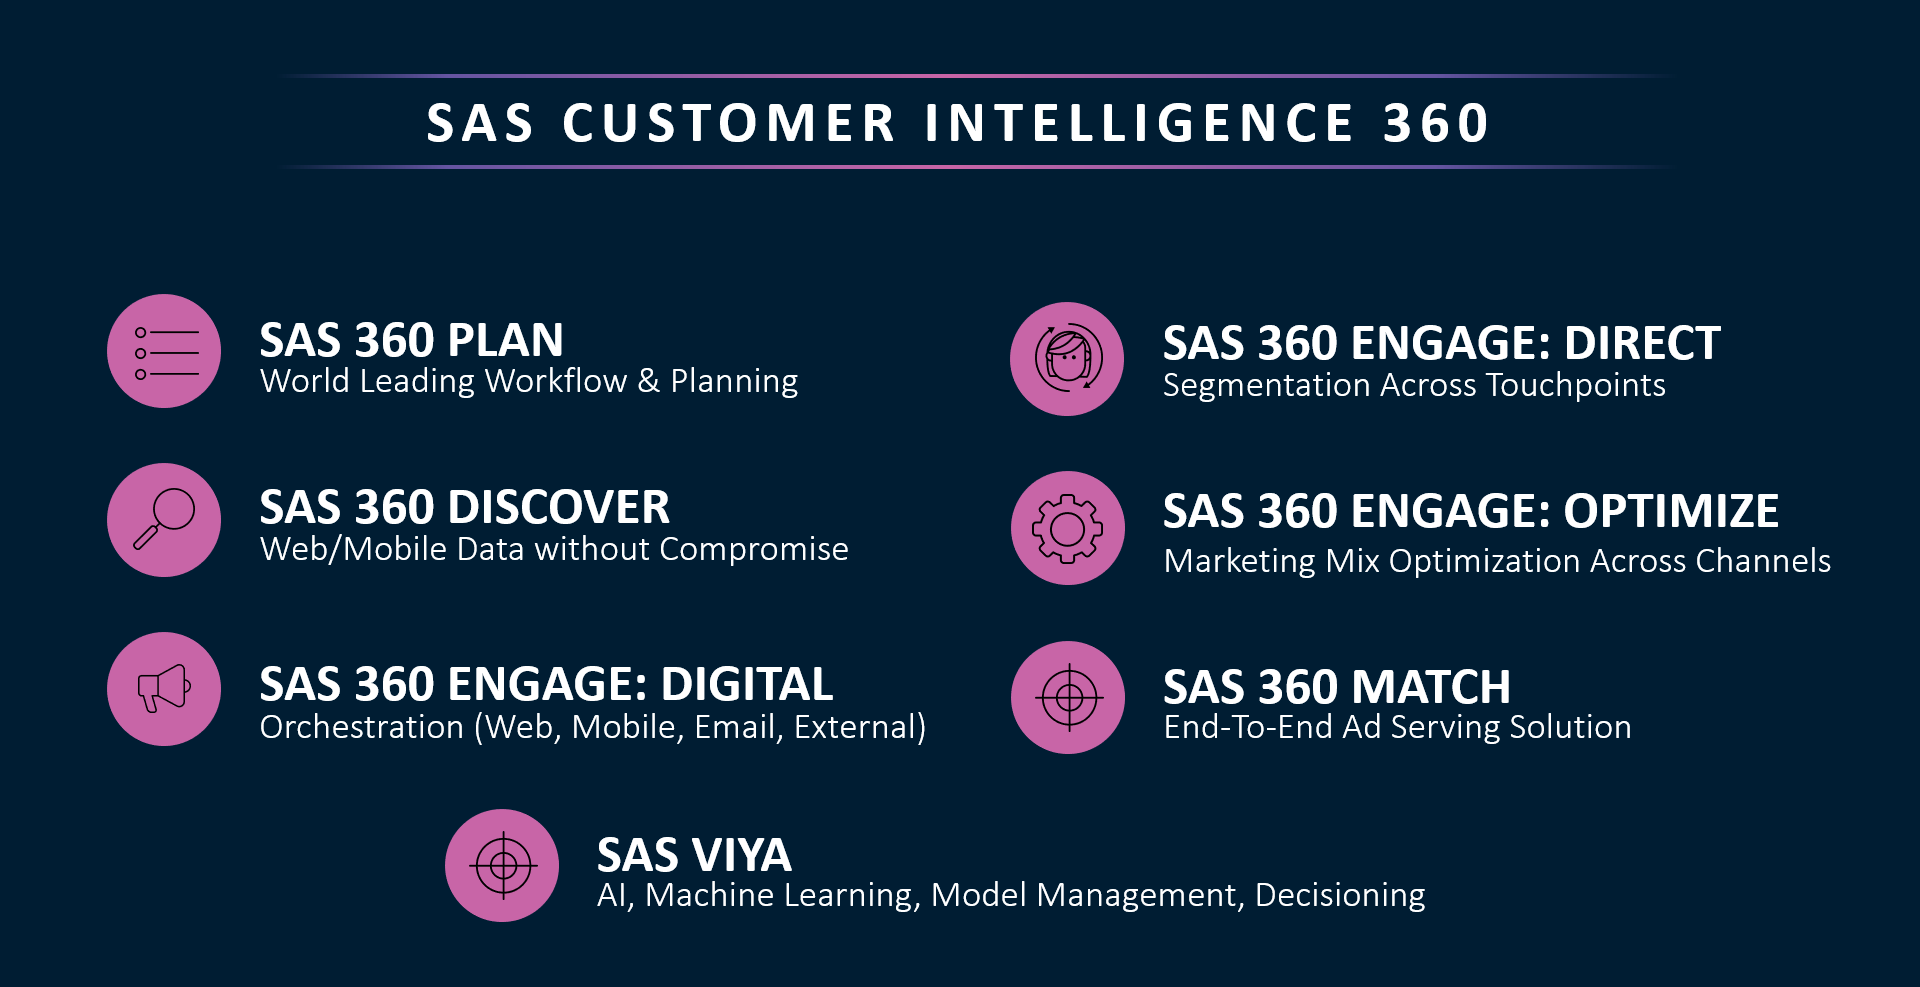 Picture of SAS Artificial Intelligence tools.